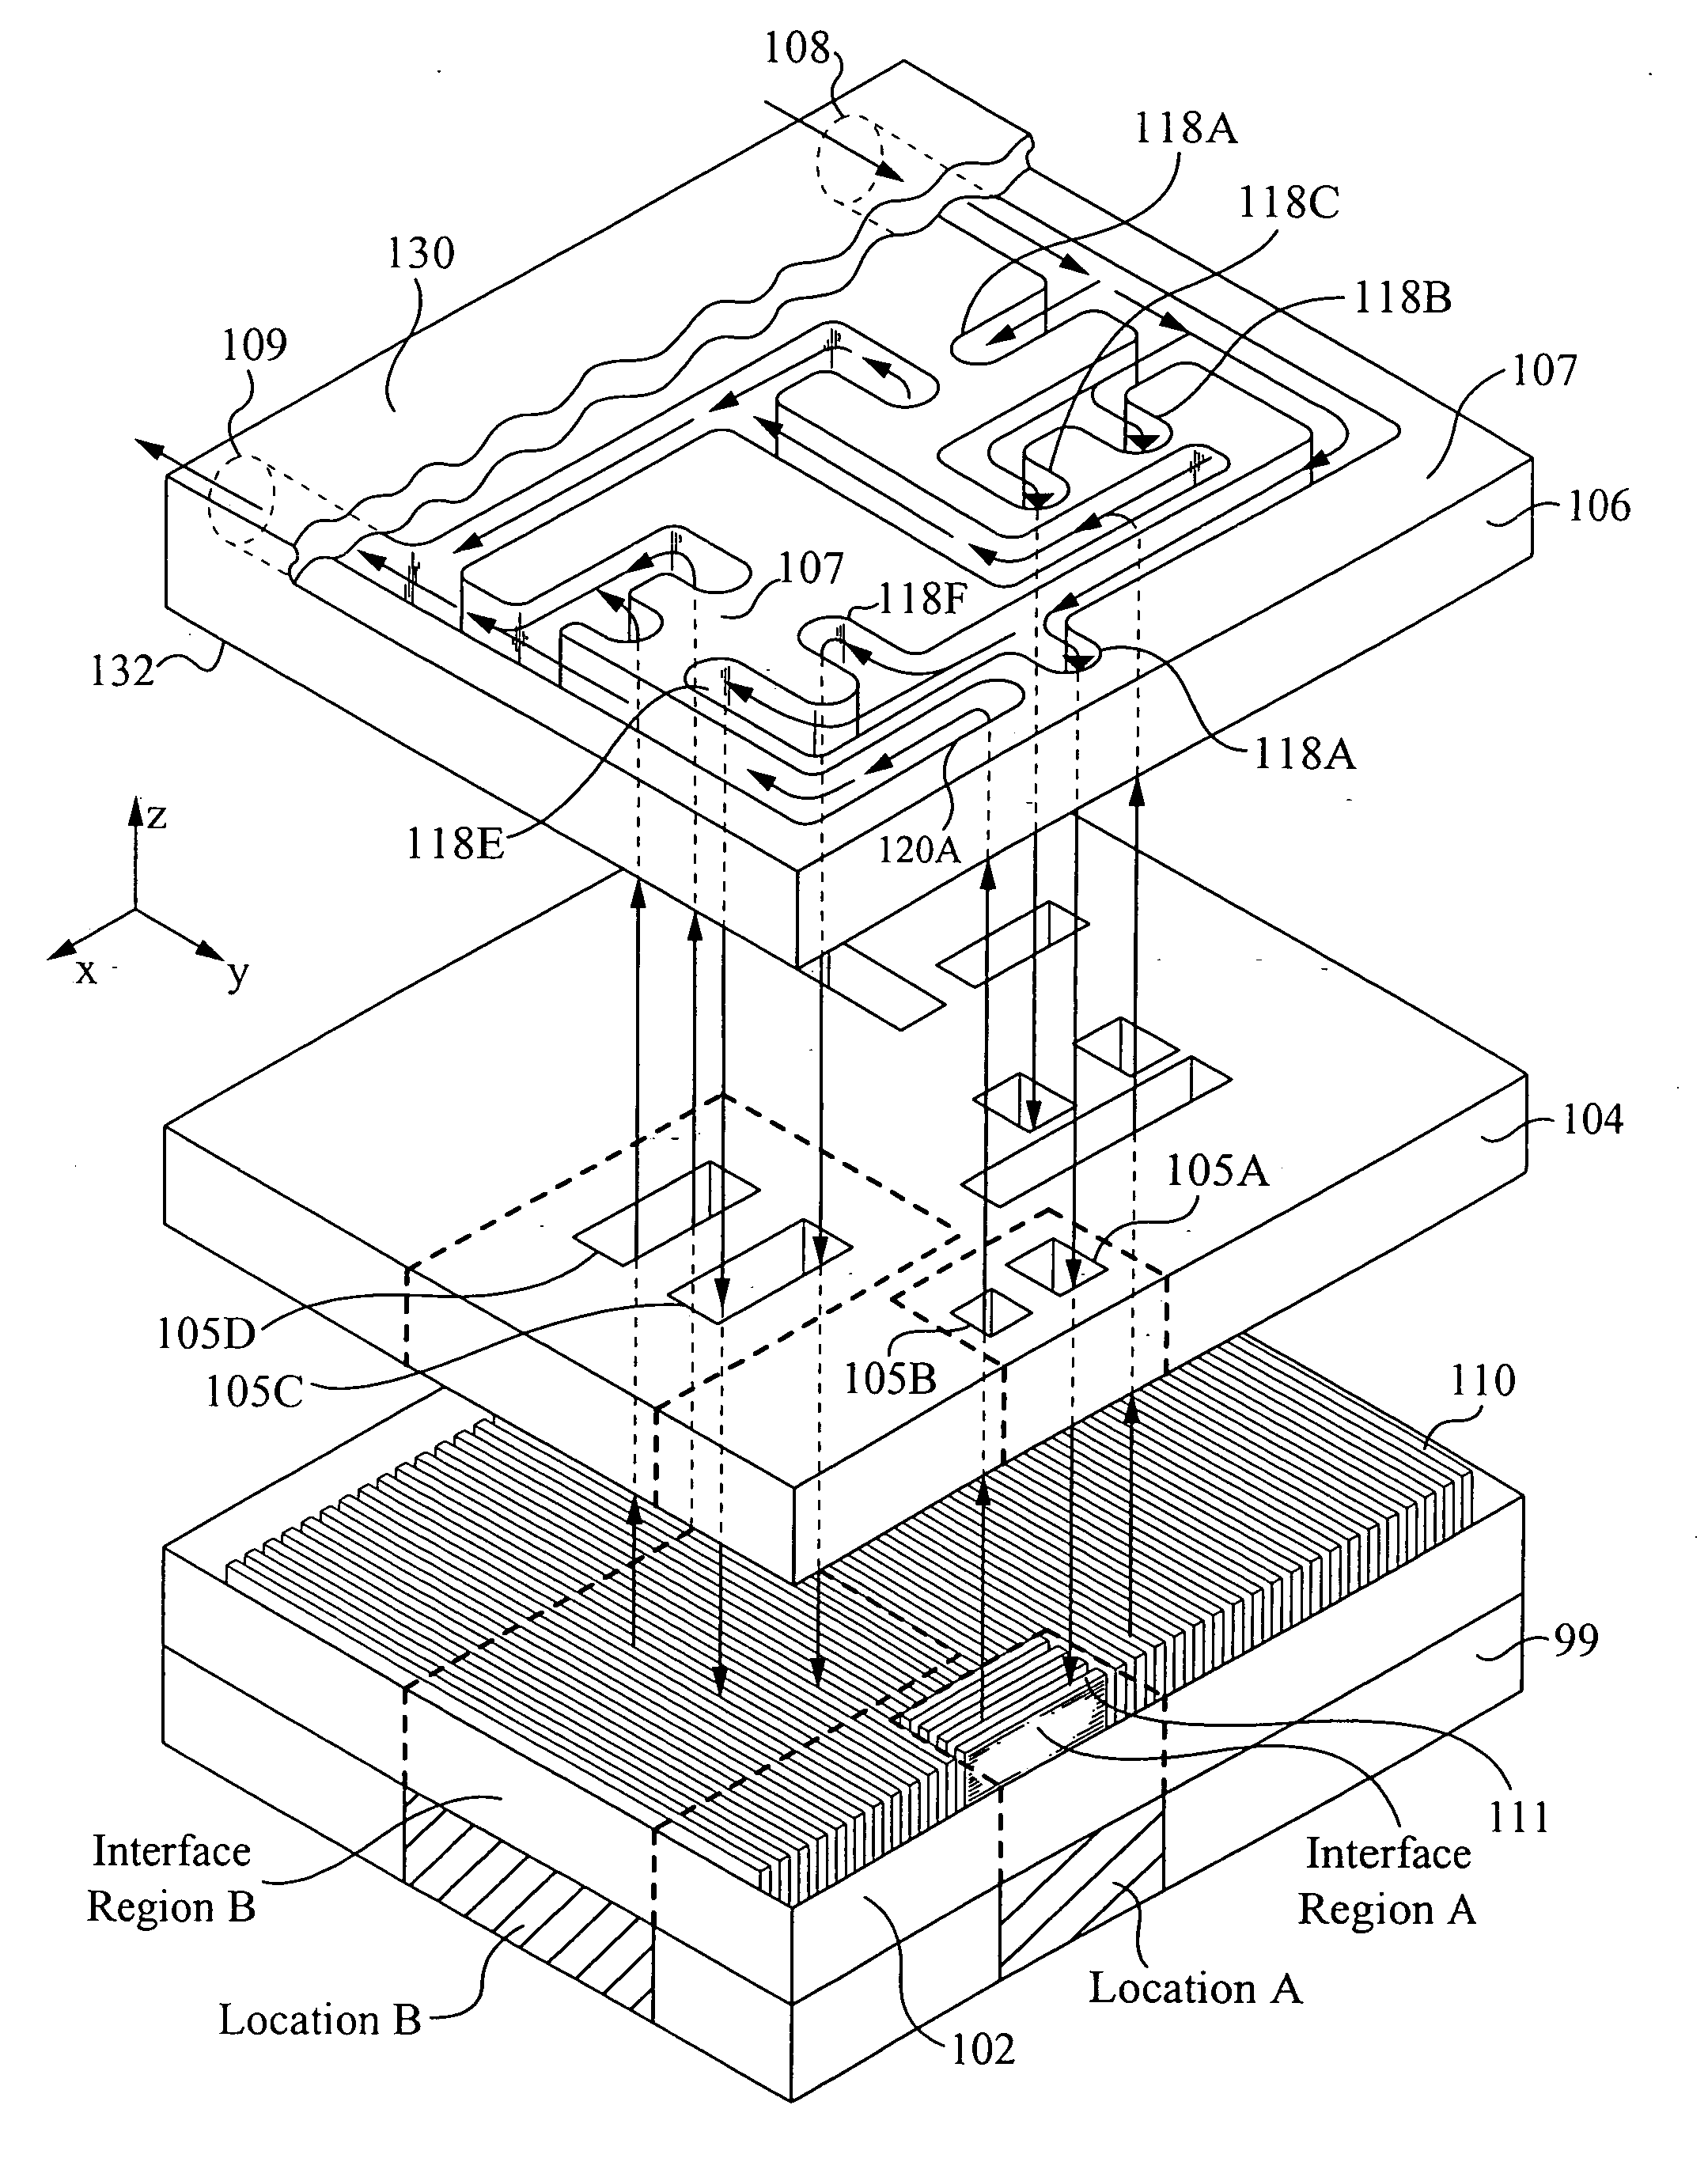 Fabrication of high surface to volume ratio structures and their integration in microheat exchangers for liquid cooling systems